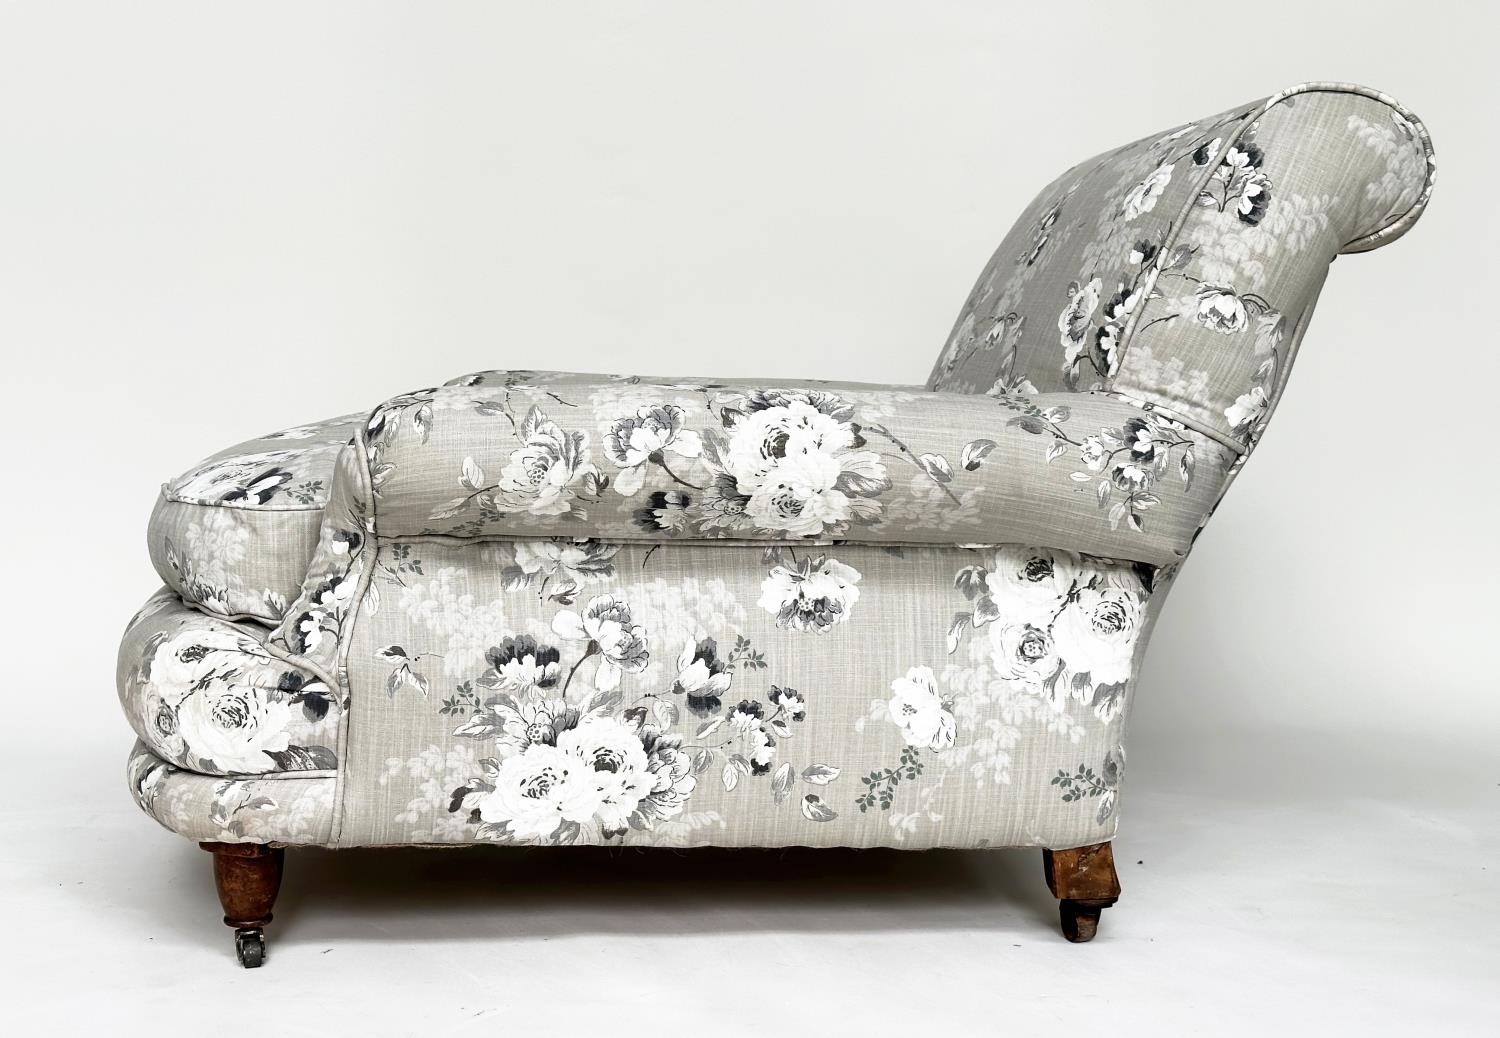 WILLIAM BIRCH ARMCHAIR, 19th century Howard type, newly upholstered in grey linen impressed numerals - Image 3 of 13